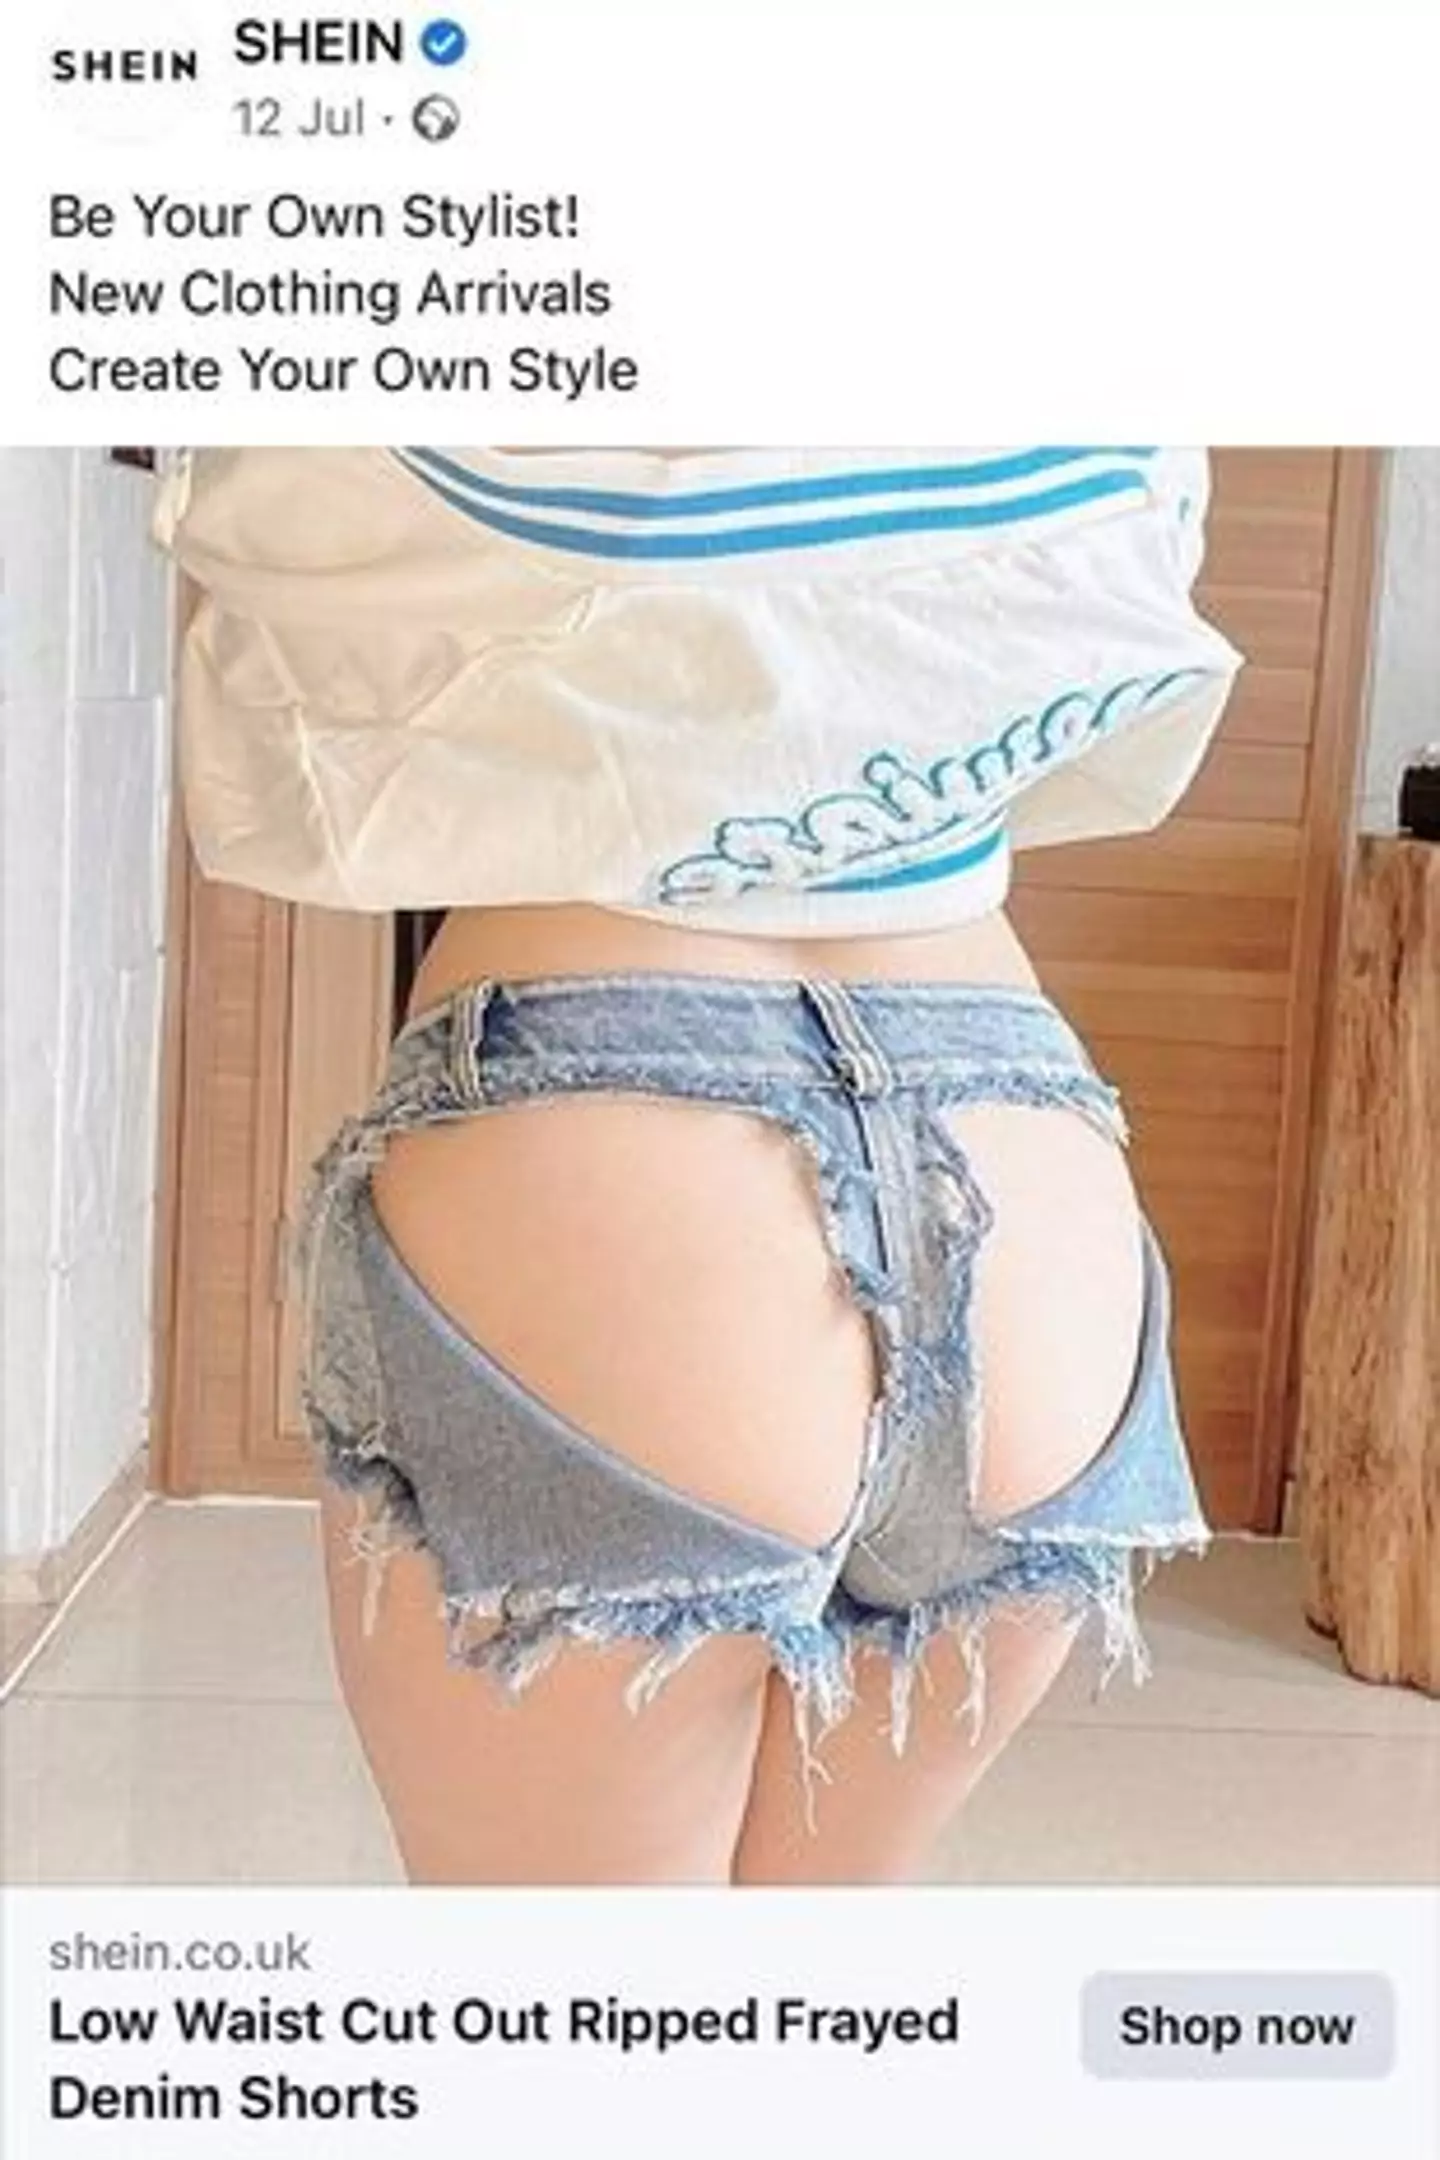 These Shein shorts have gone viral.